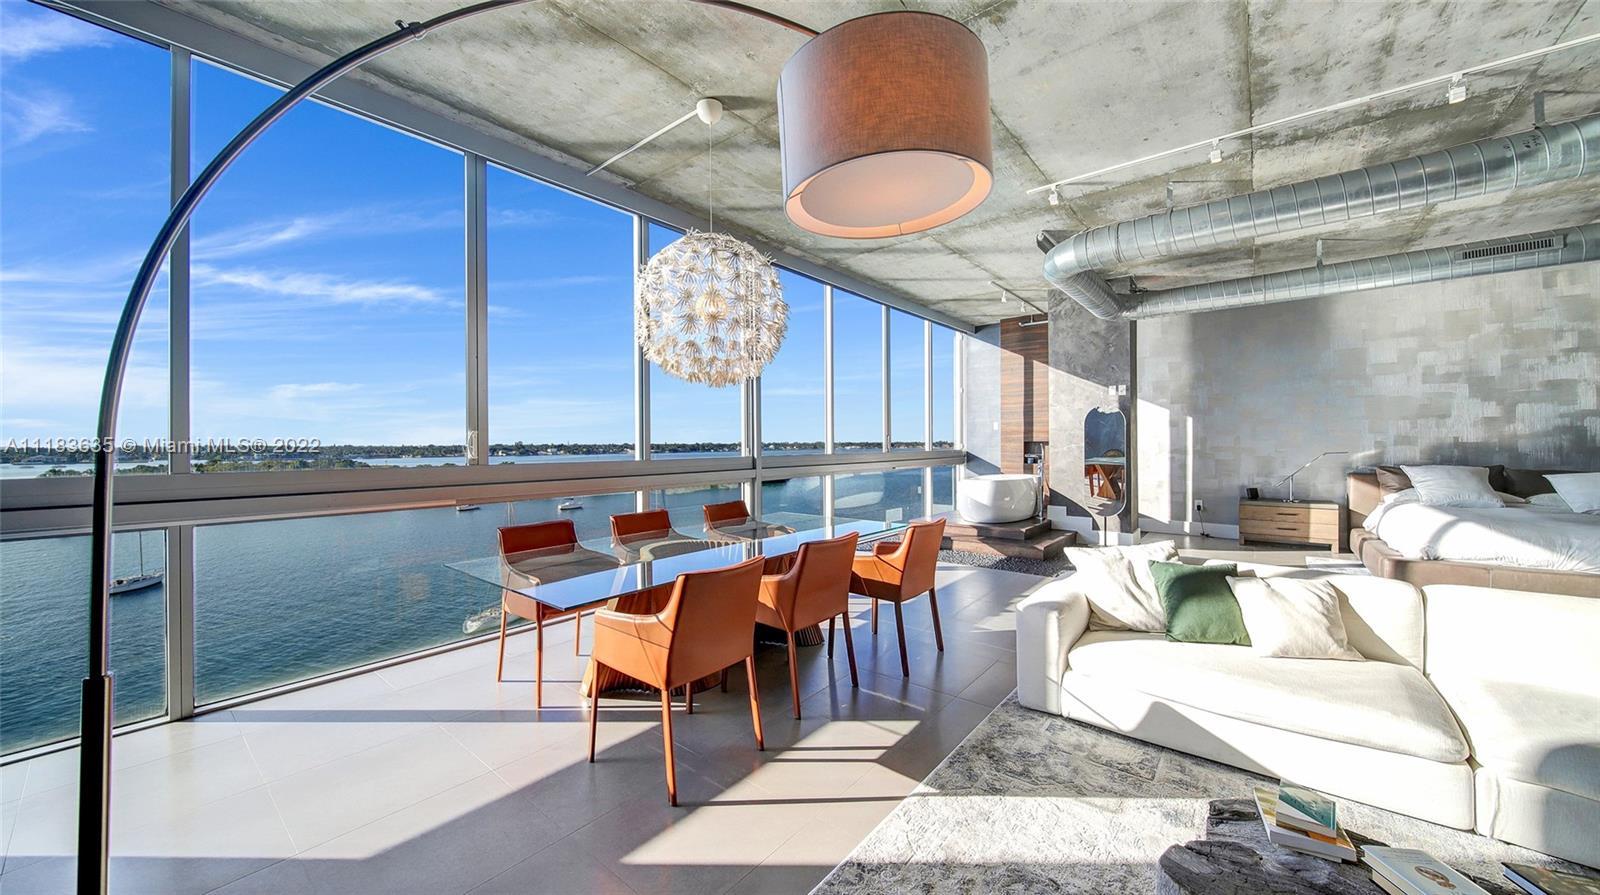 Unique loft  at the contemporary Space 01 a waterfront building with panoramic views of Biscayne Bay